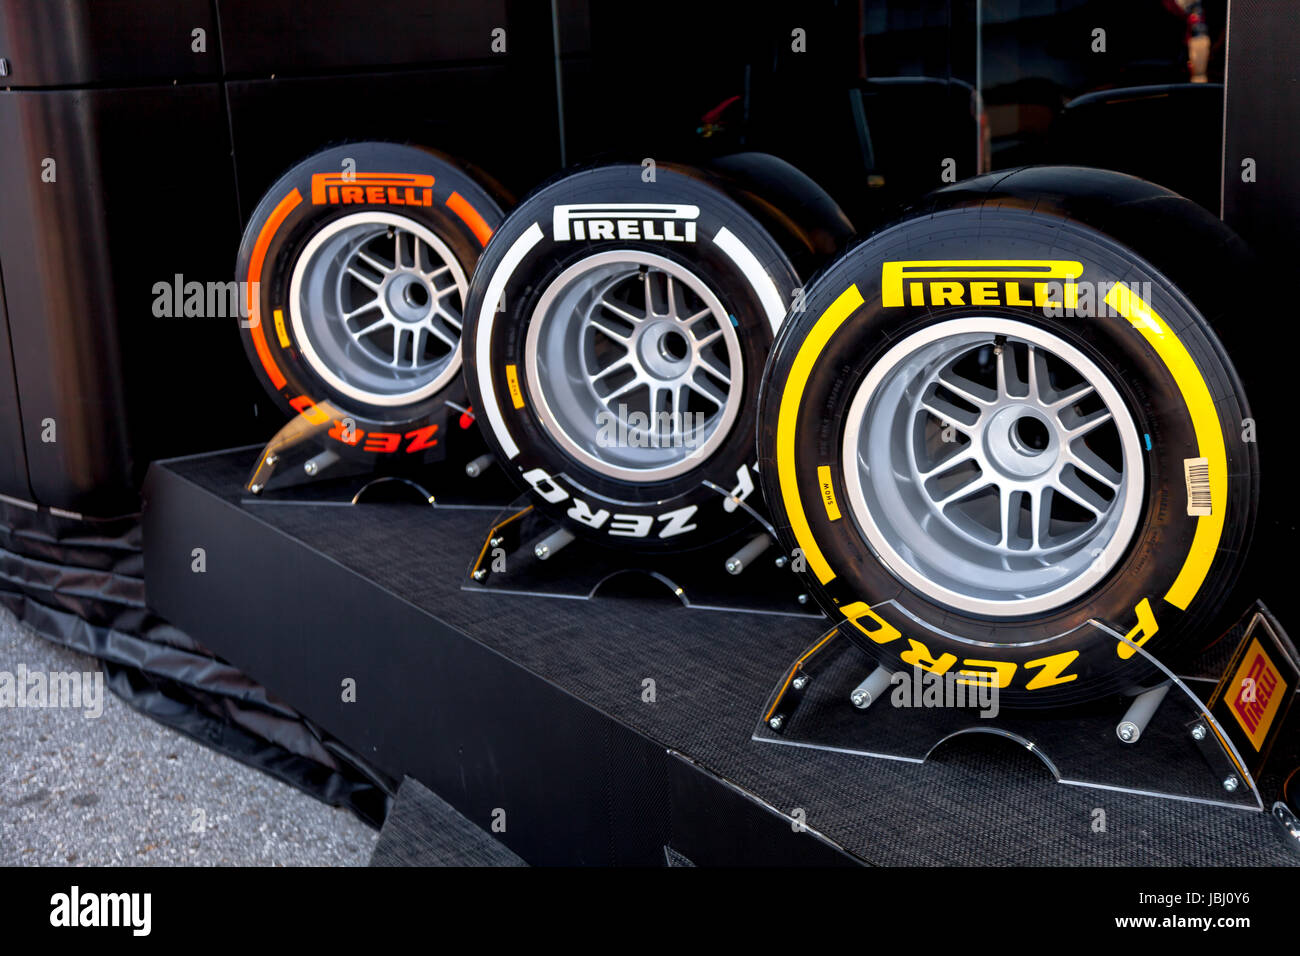 JEREZ DE LA FRONTERA, SPAIN - FEB 05: Exposition of the several sets of pneumatic tires Pirelli for the championship of Formula 1 of 2013 on February 05 , 2013, in Jerez de la Frontera , Spain Stock Photo